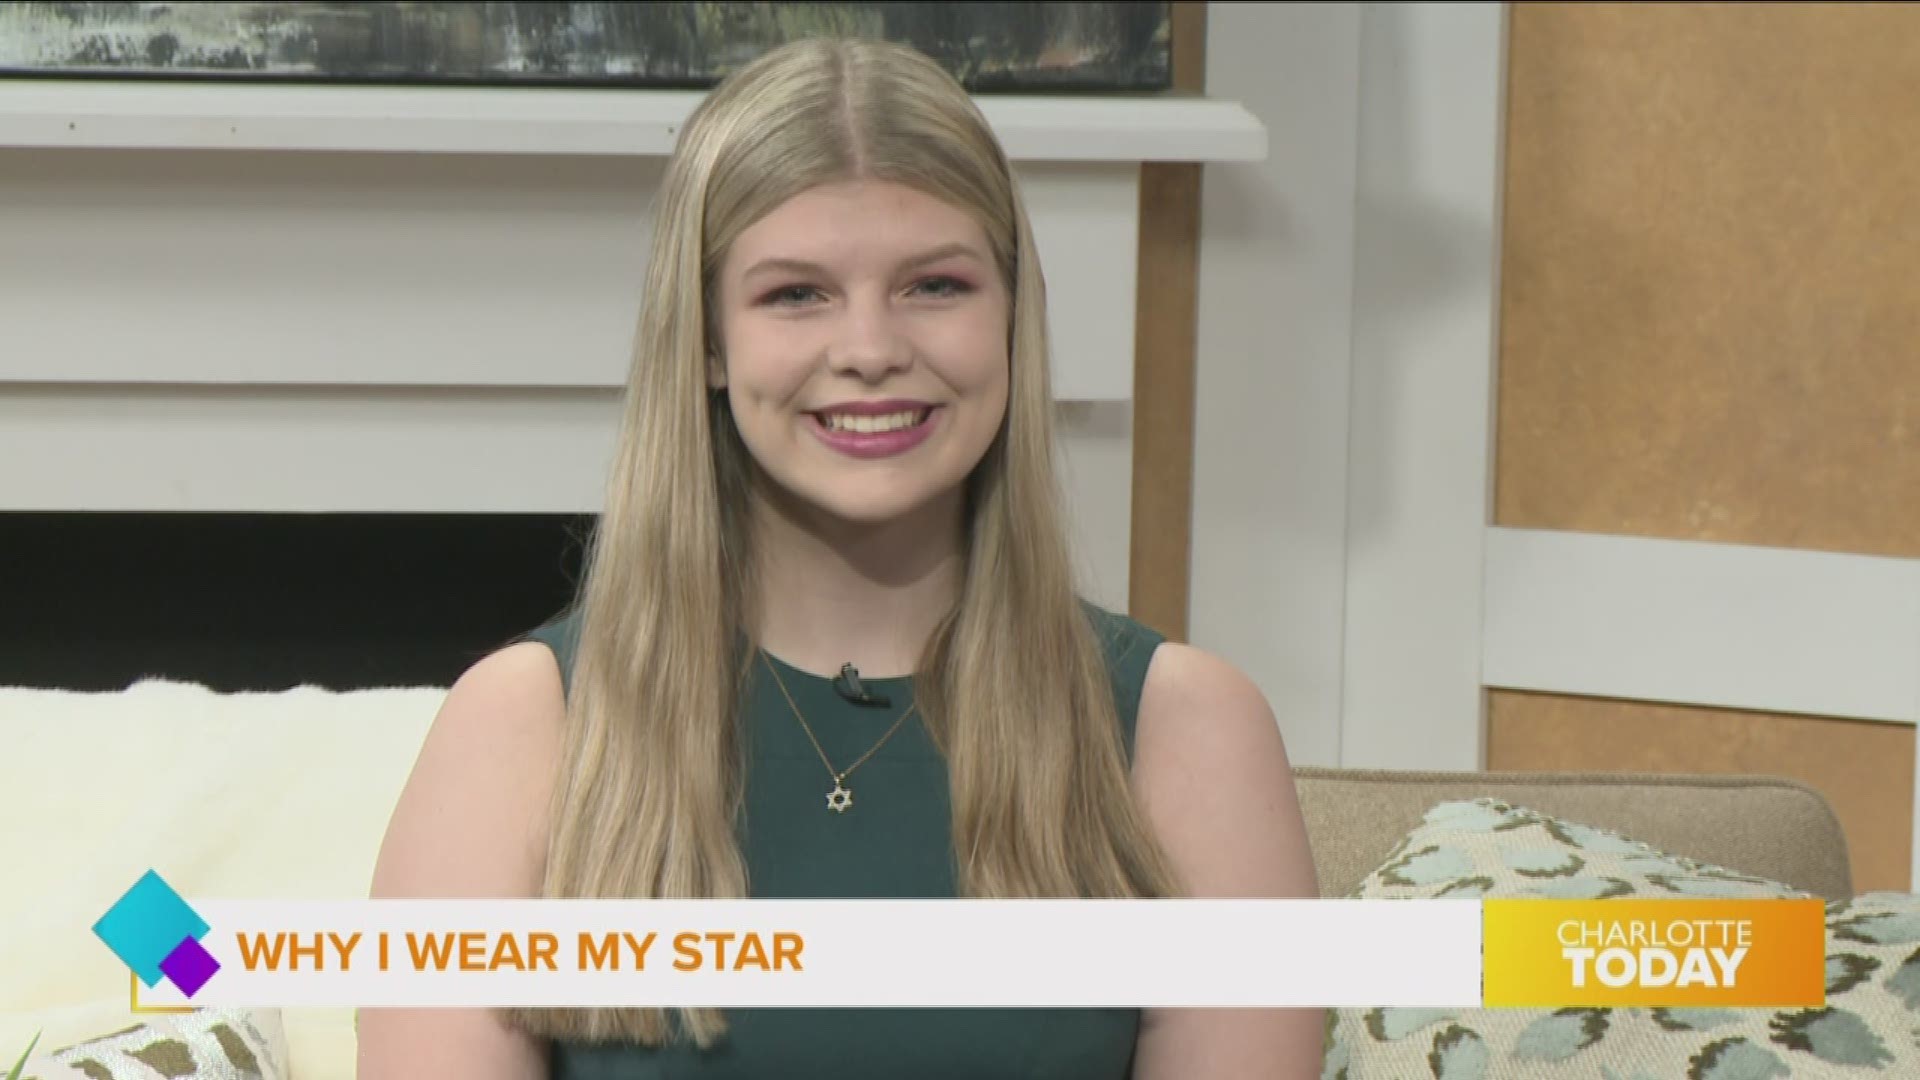 The “why I wear my star” campaign started by Abby Adams is spreading across the country.